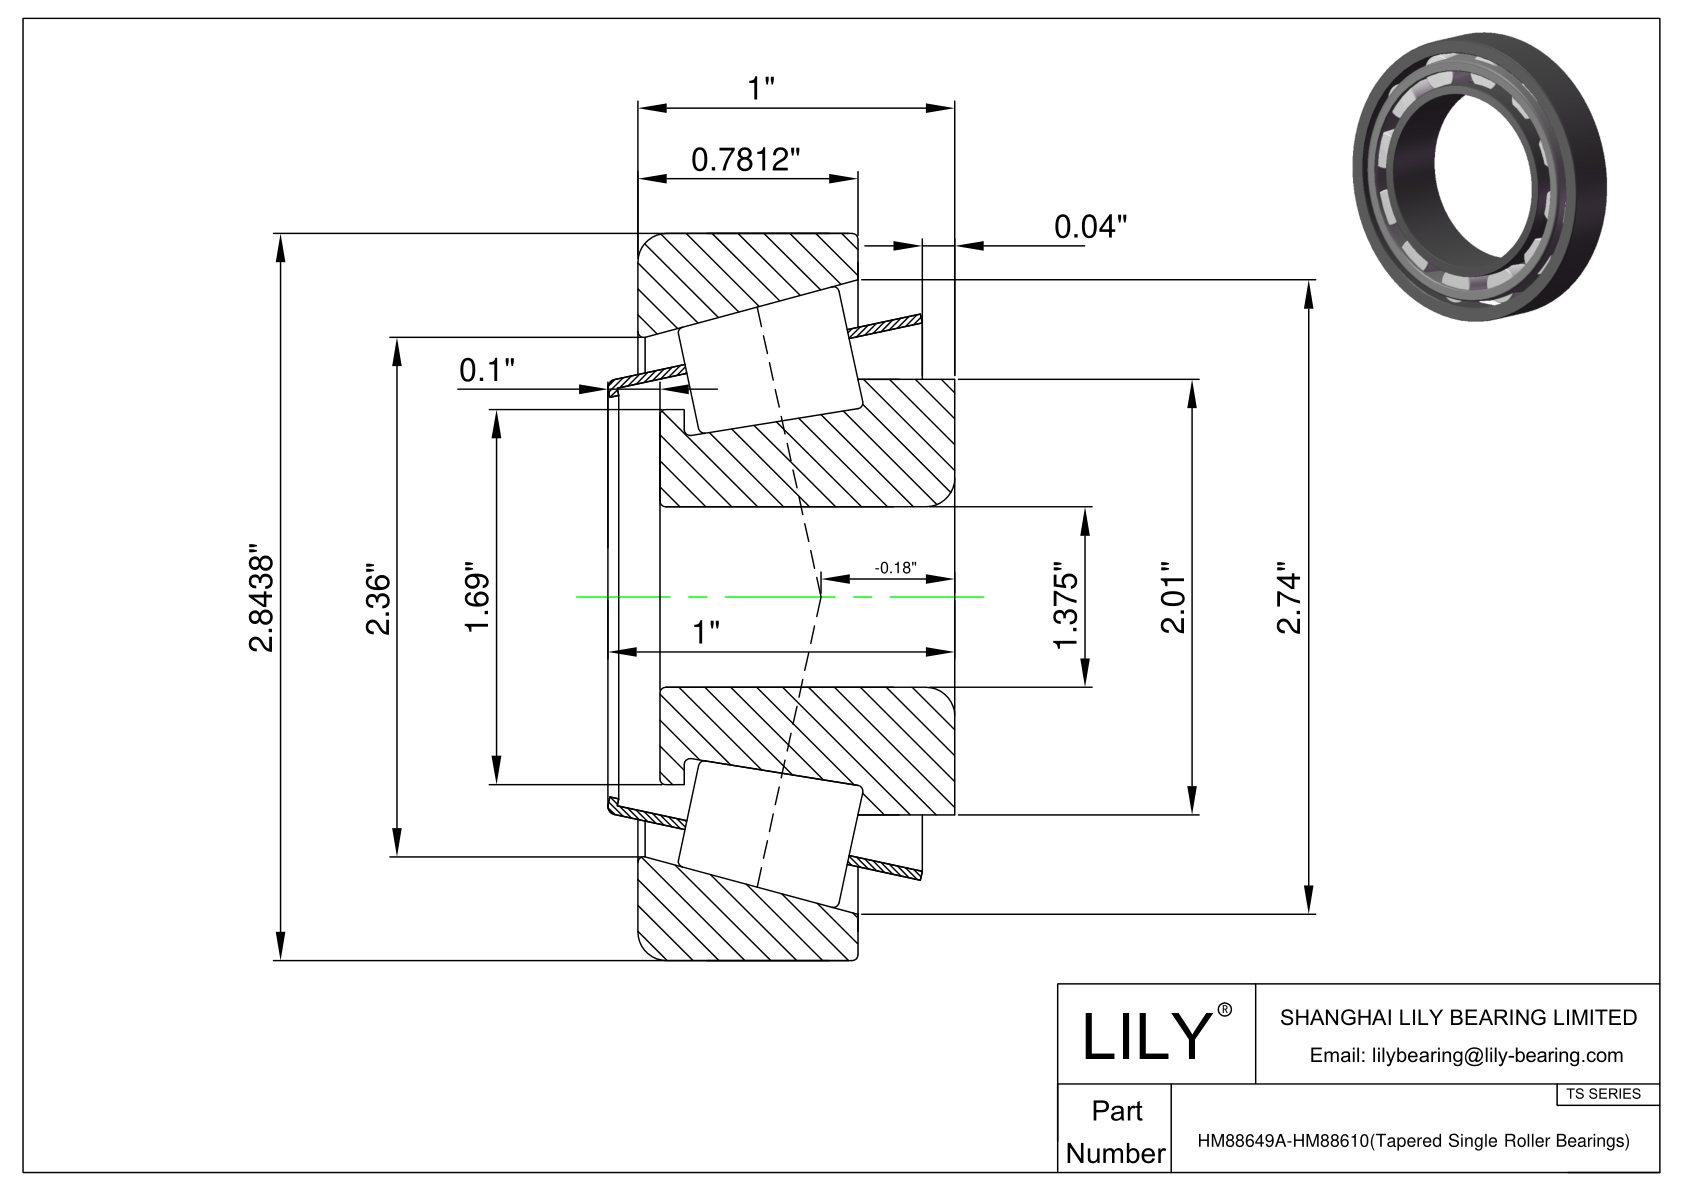 HM88649A-HM88610 TS (Tapered Single Roller Bearings) (Imperial) cad drawing